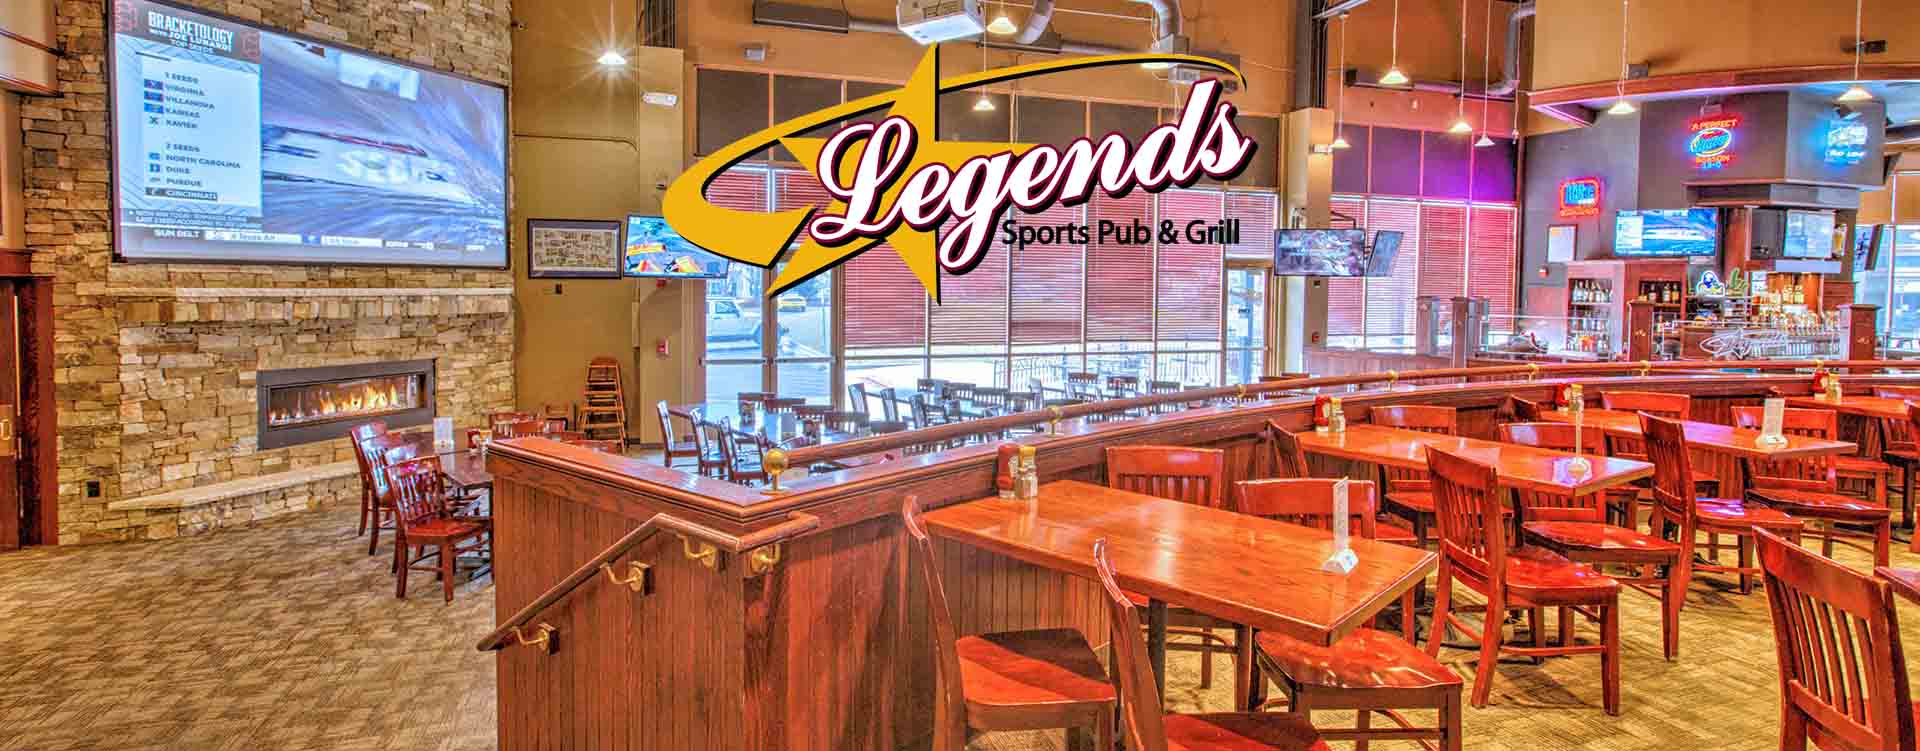 Legends Pub and Grill